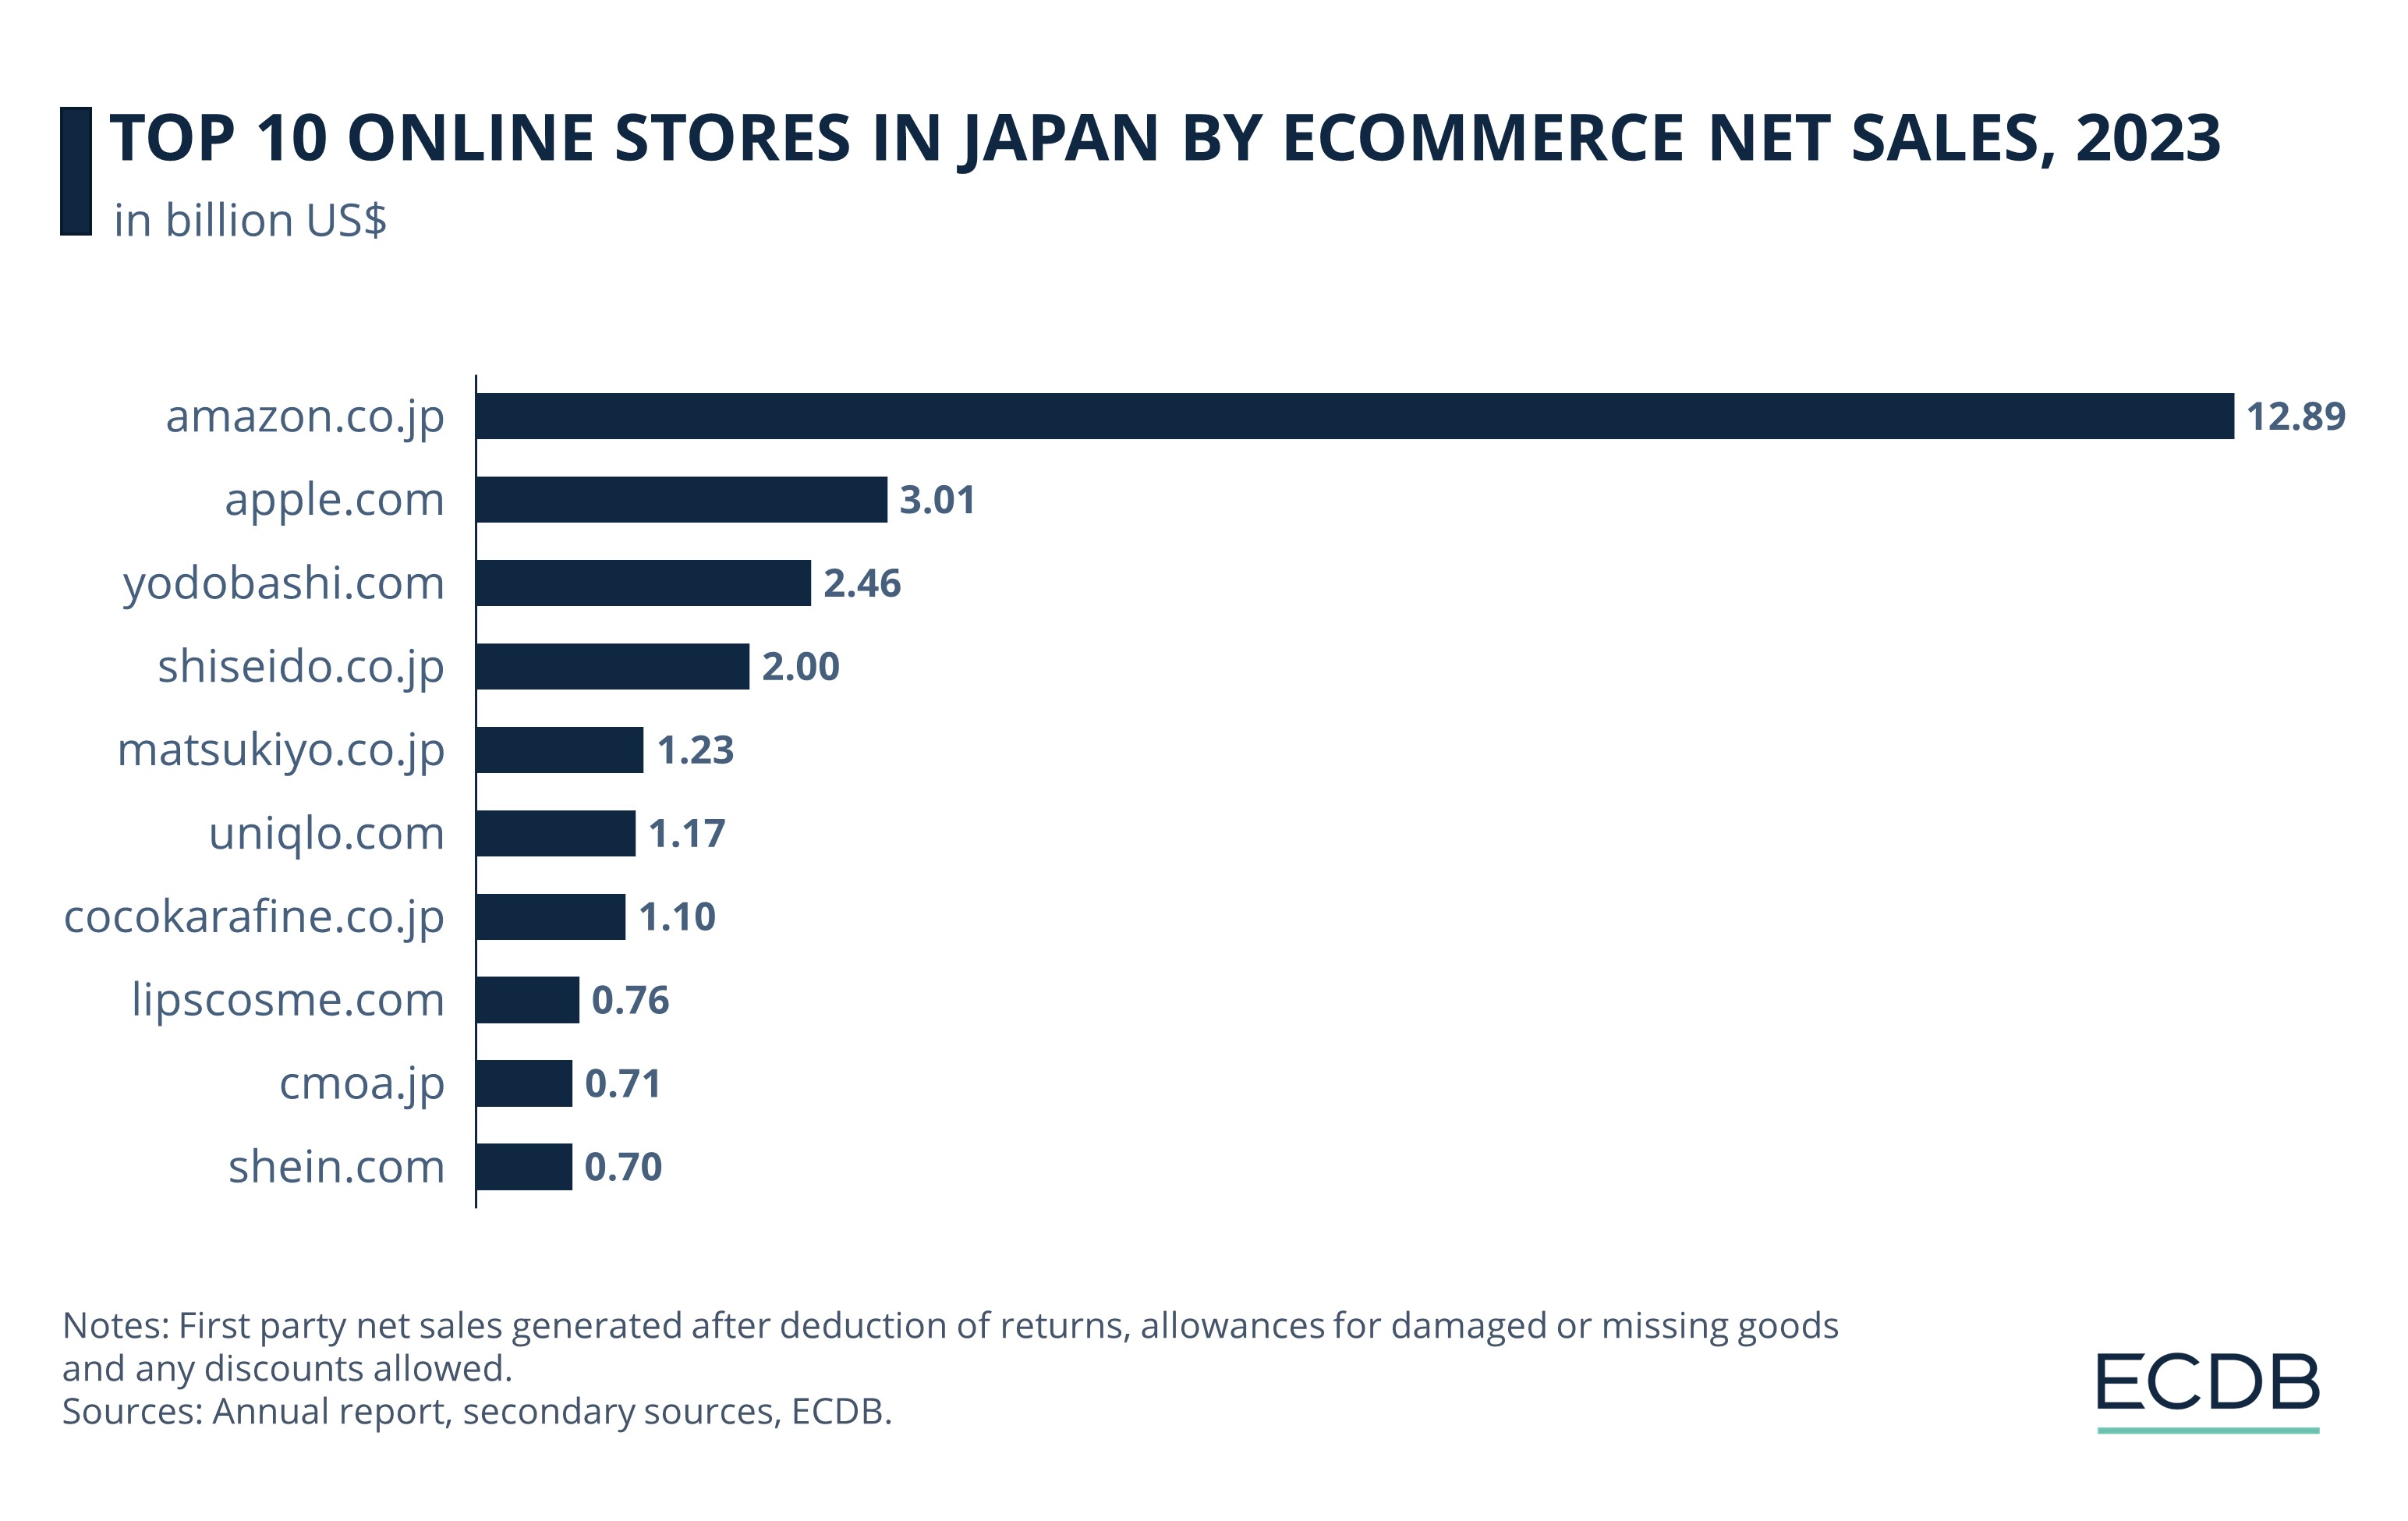 Top 10 Online Stores In Japan By Ecommerce Net Sales, 2023